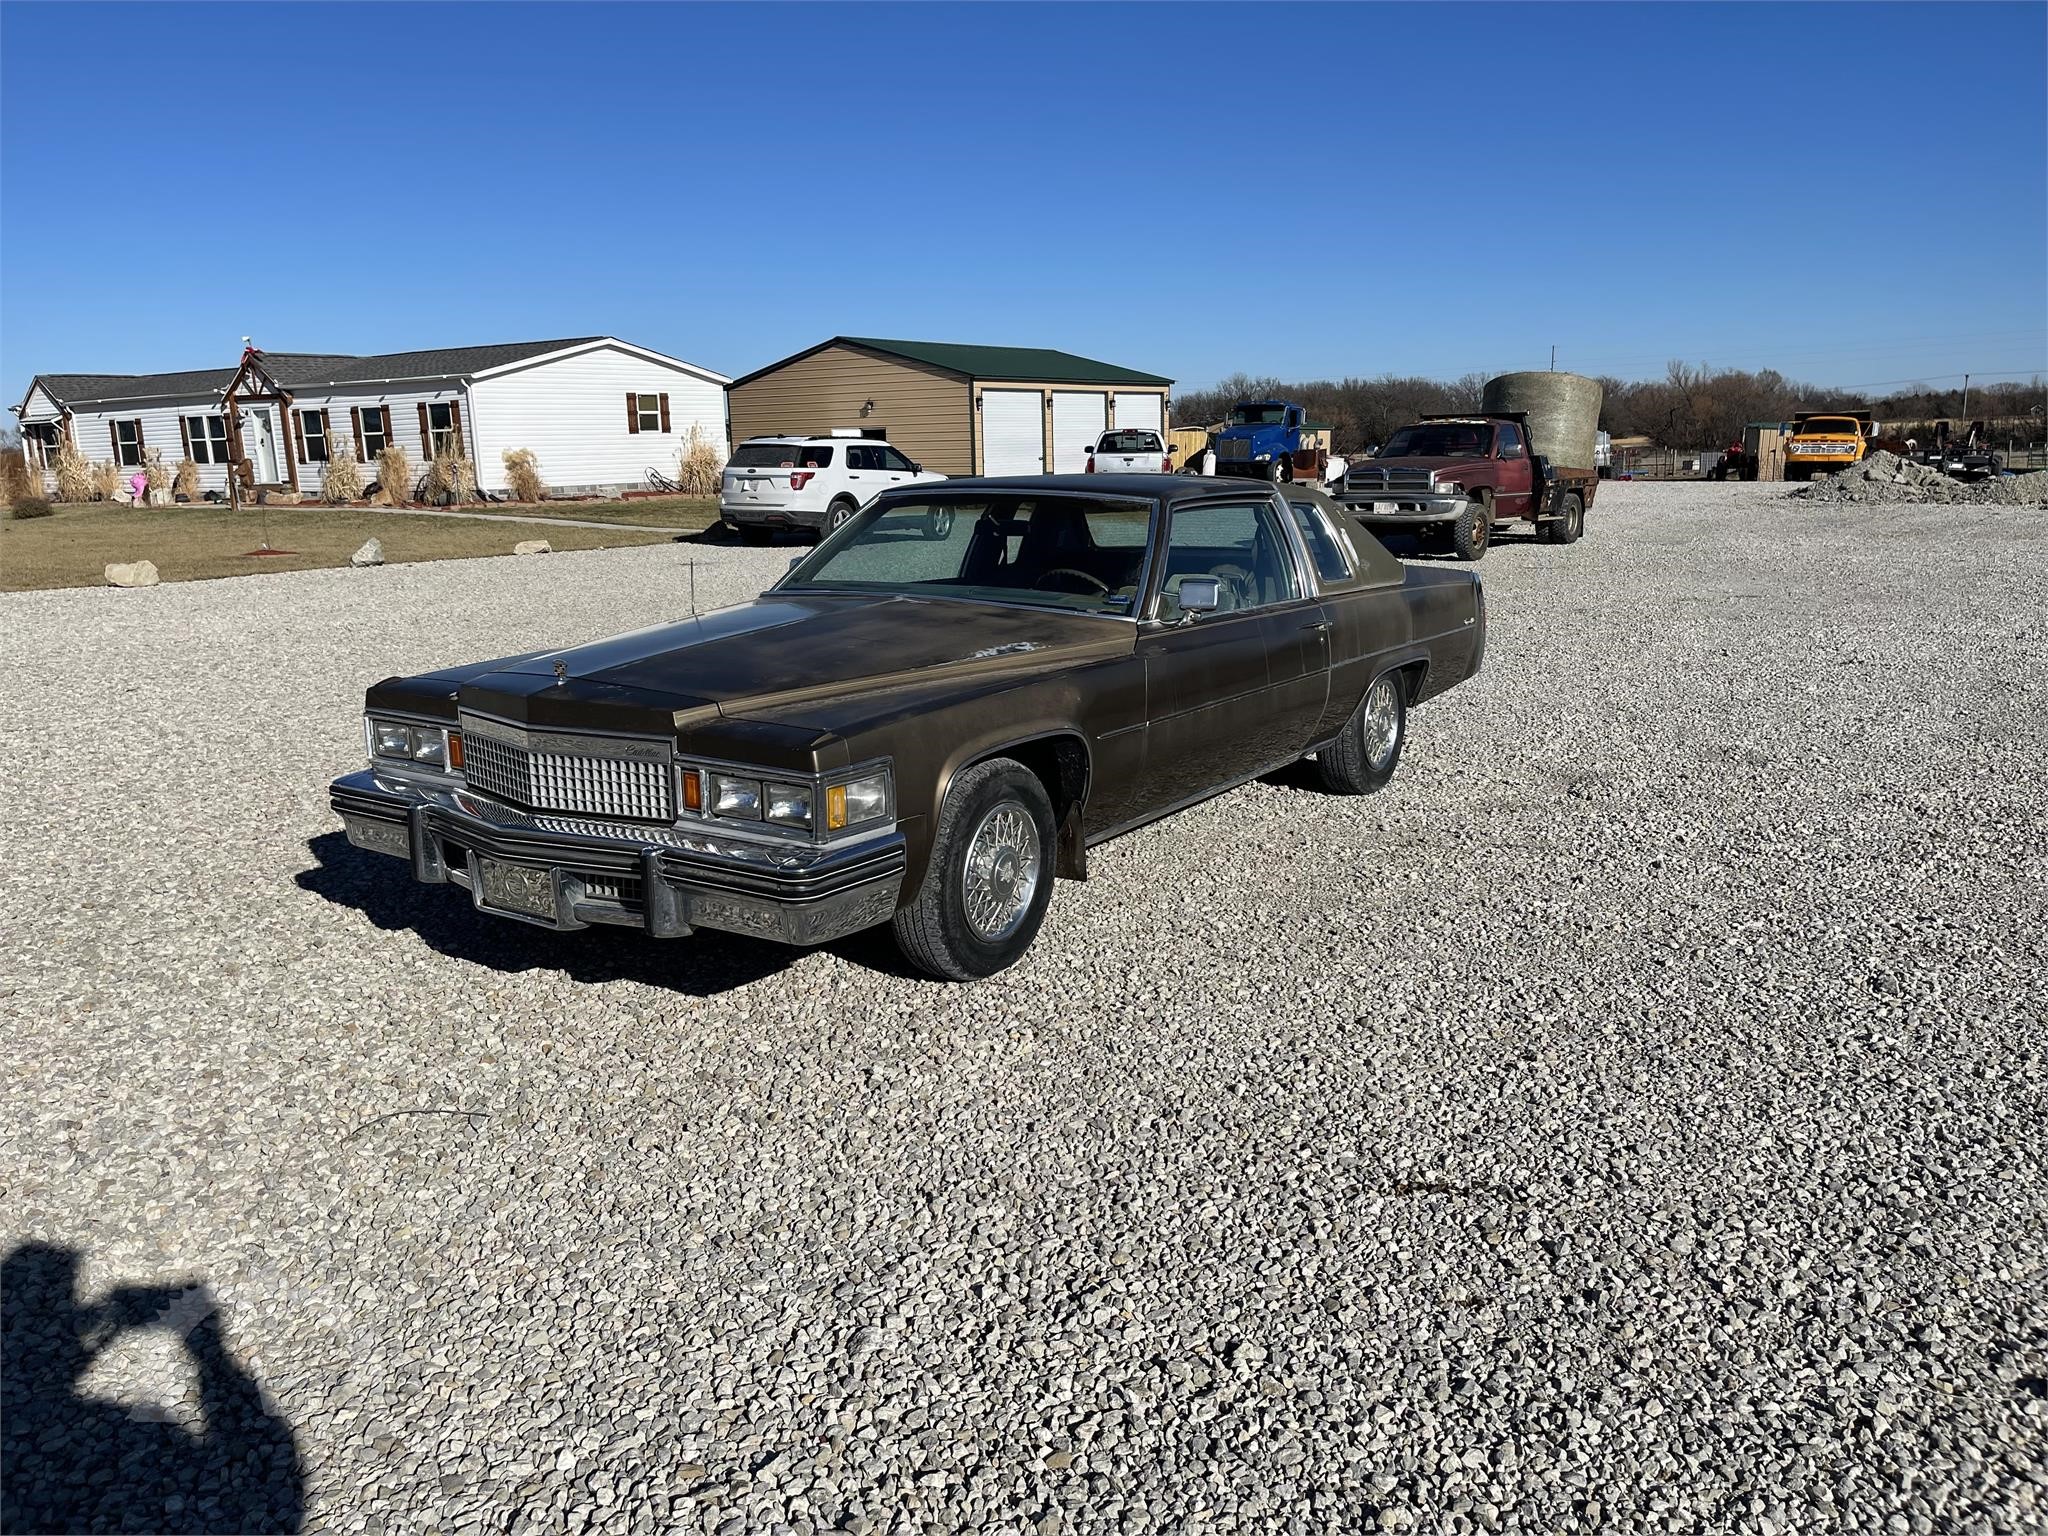 CADILLAC Otherstock Auction Results In Kansas - 7 Listings |  AuctionTime.com - Page 1 of 1